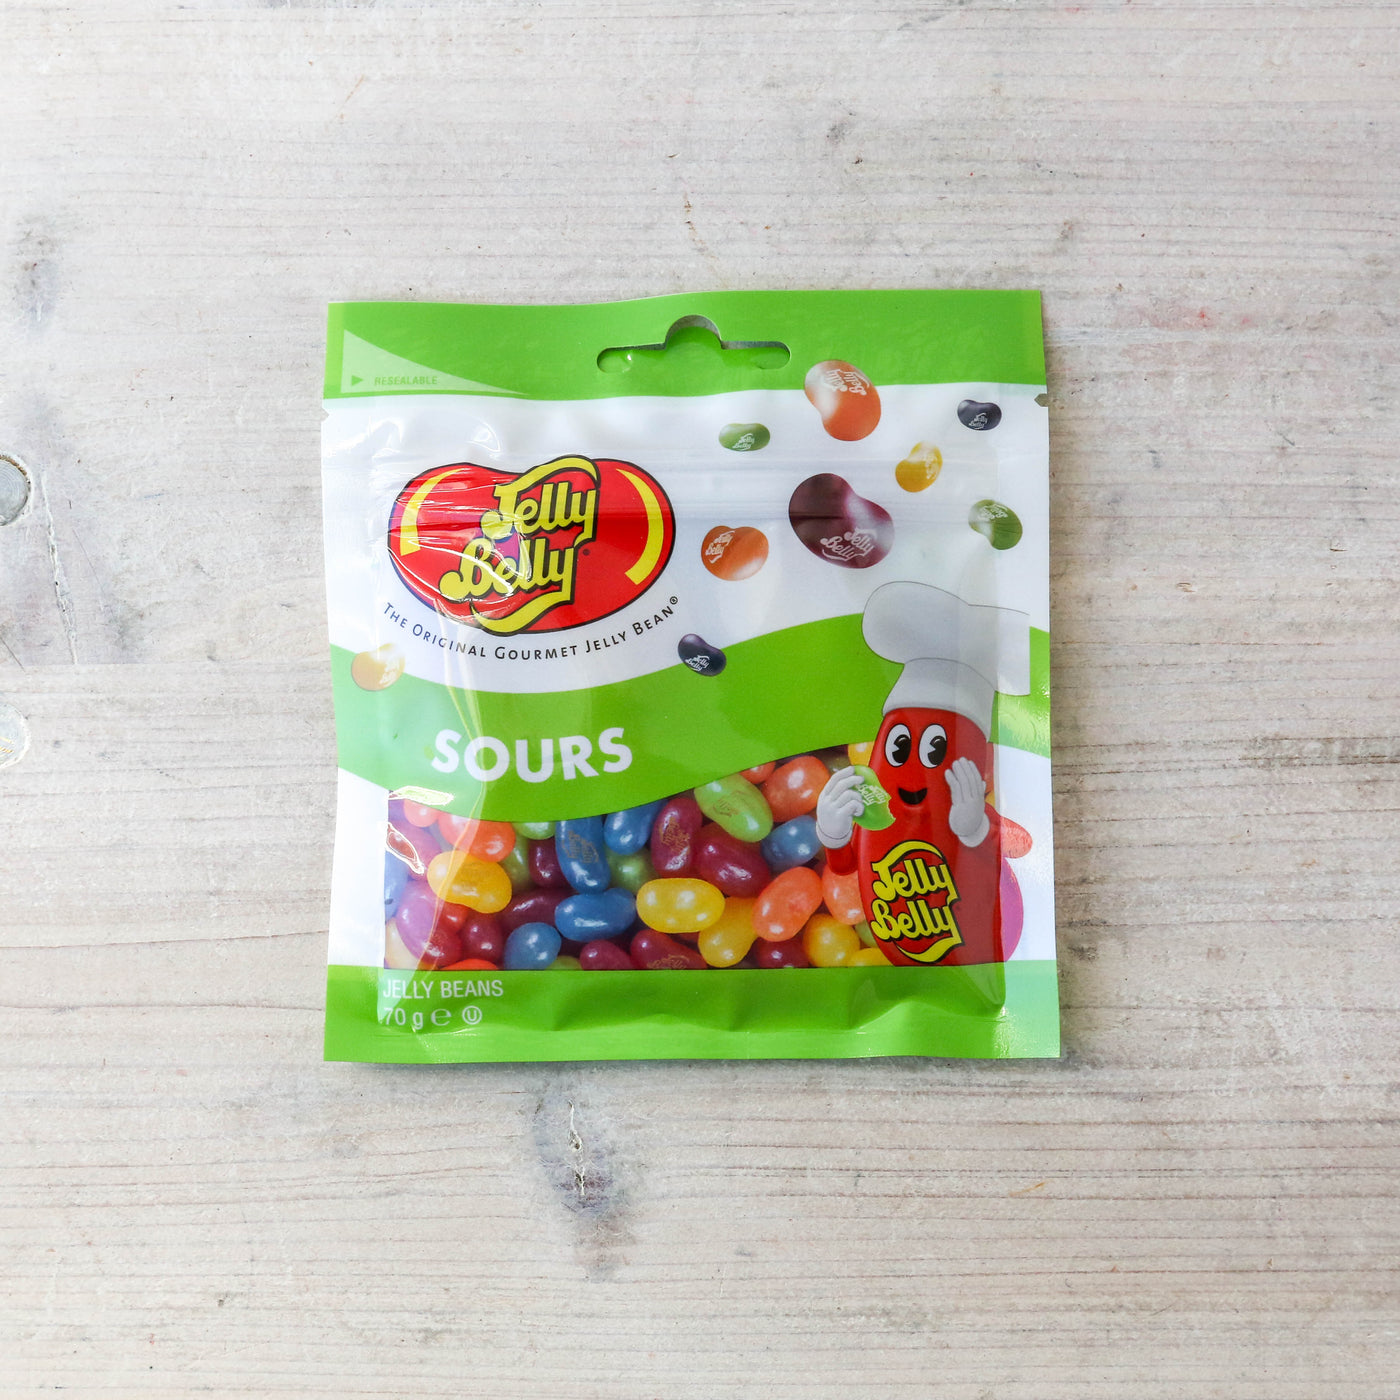 Jelly Belly Sours Mix Jelly Beans